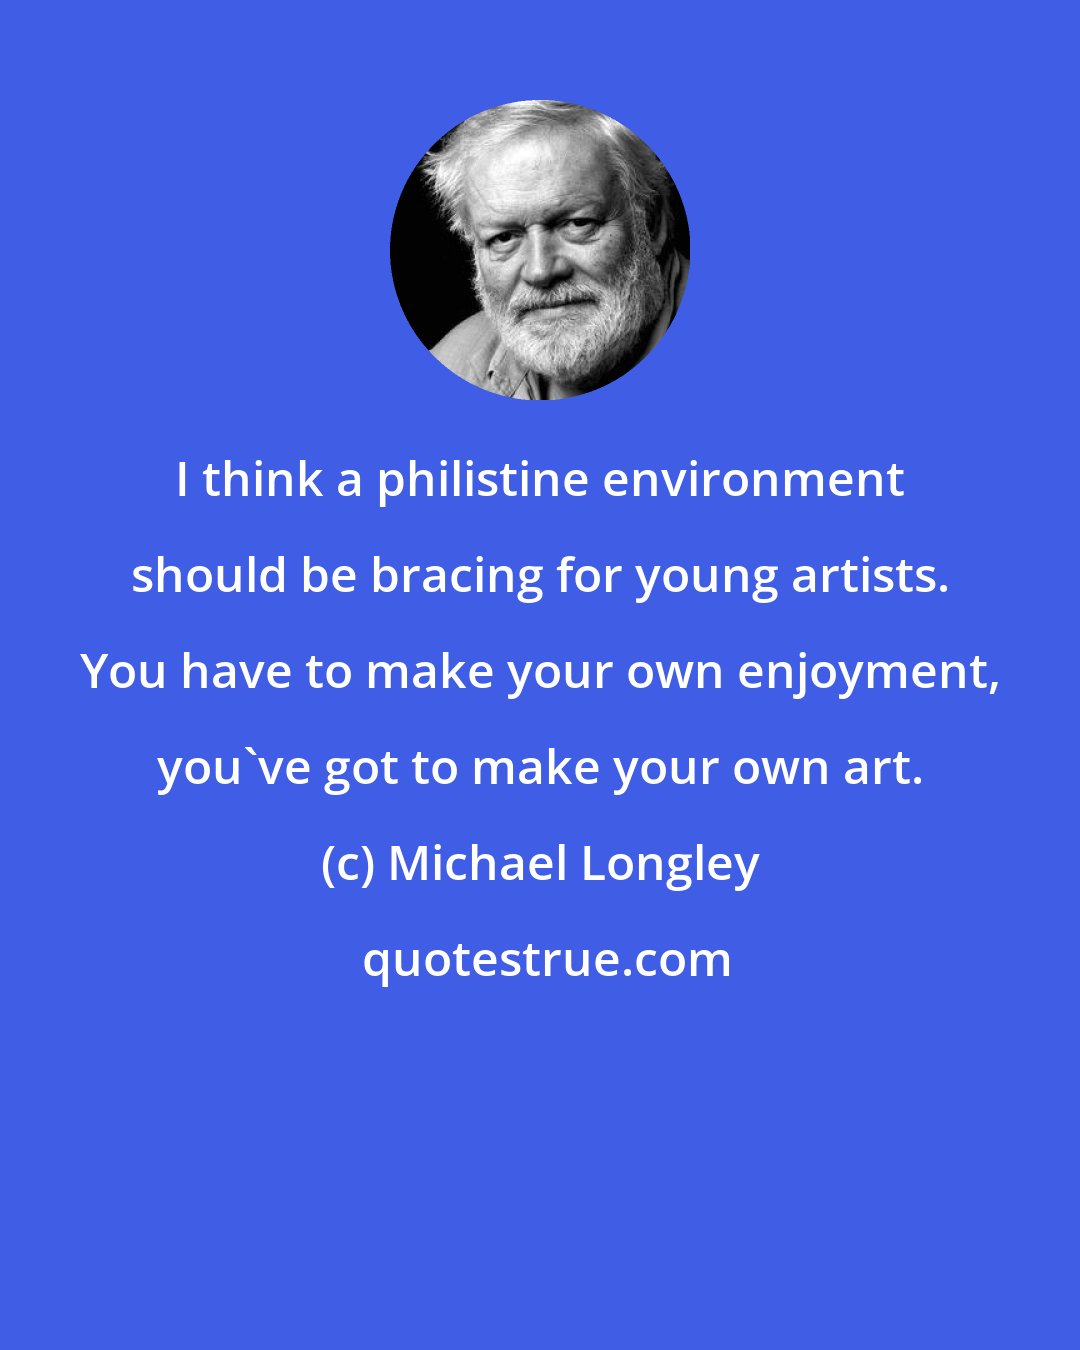 Michael Longley: I think a philistine environment should be bracing for young artists. You have to make your own enjoyment, you've got to make your own art.